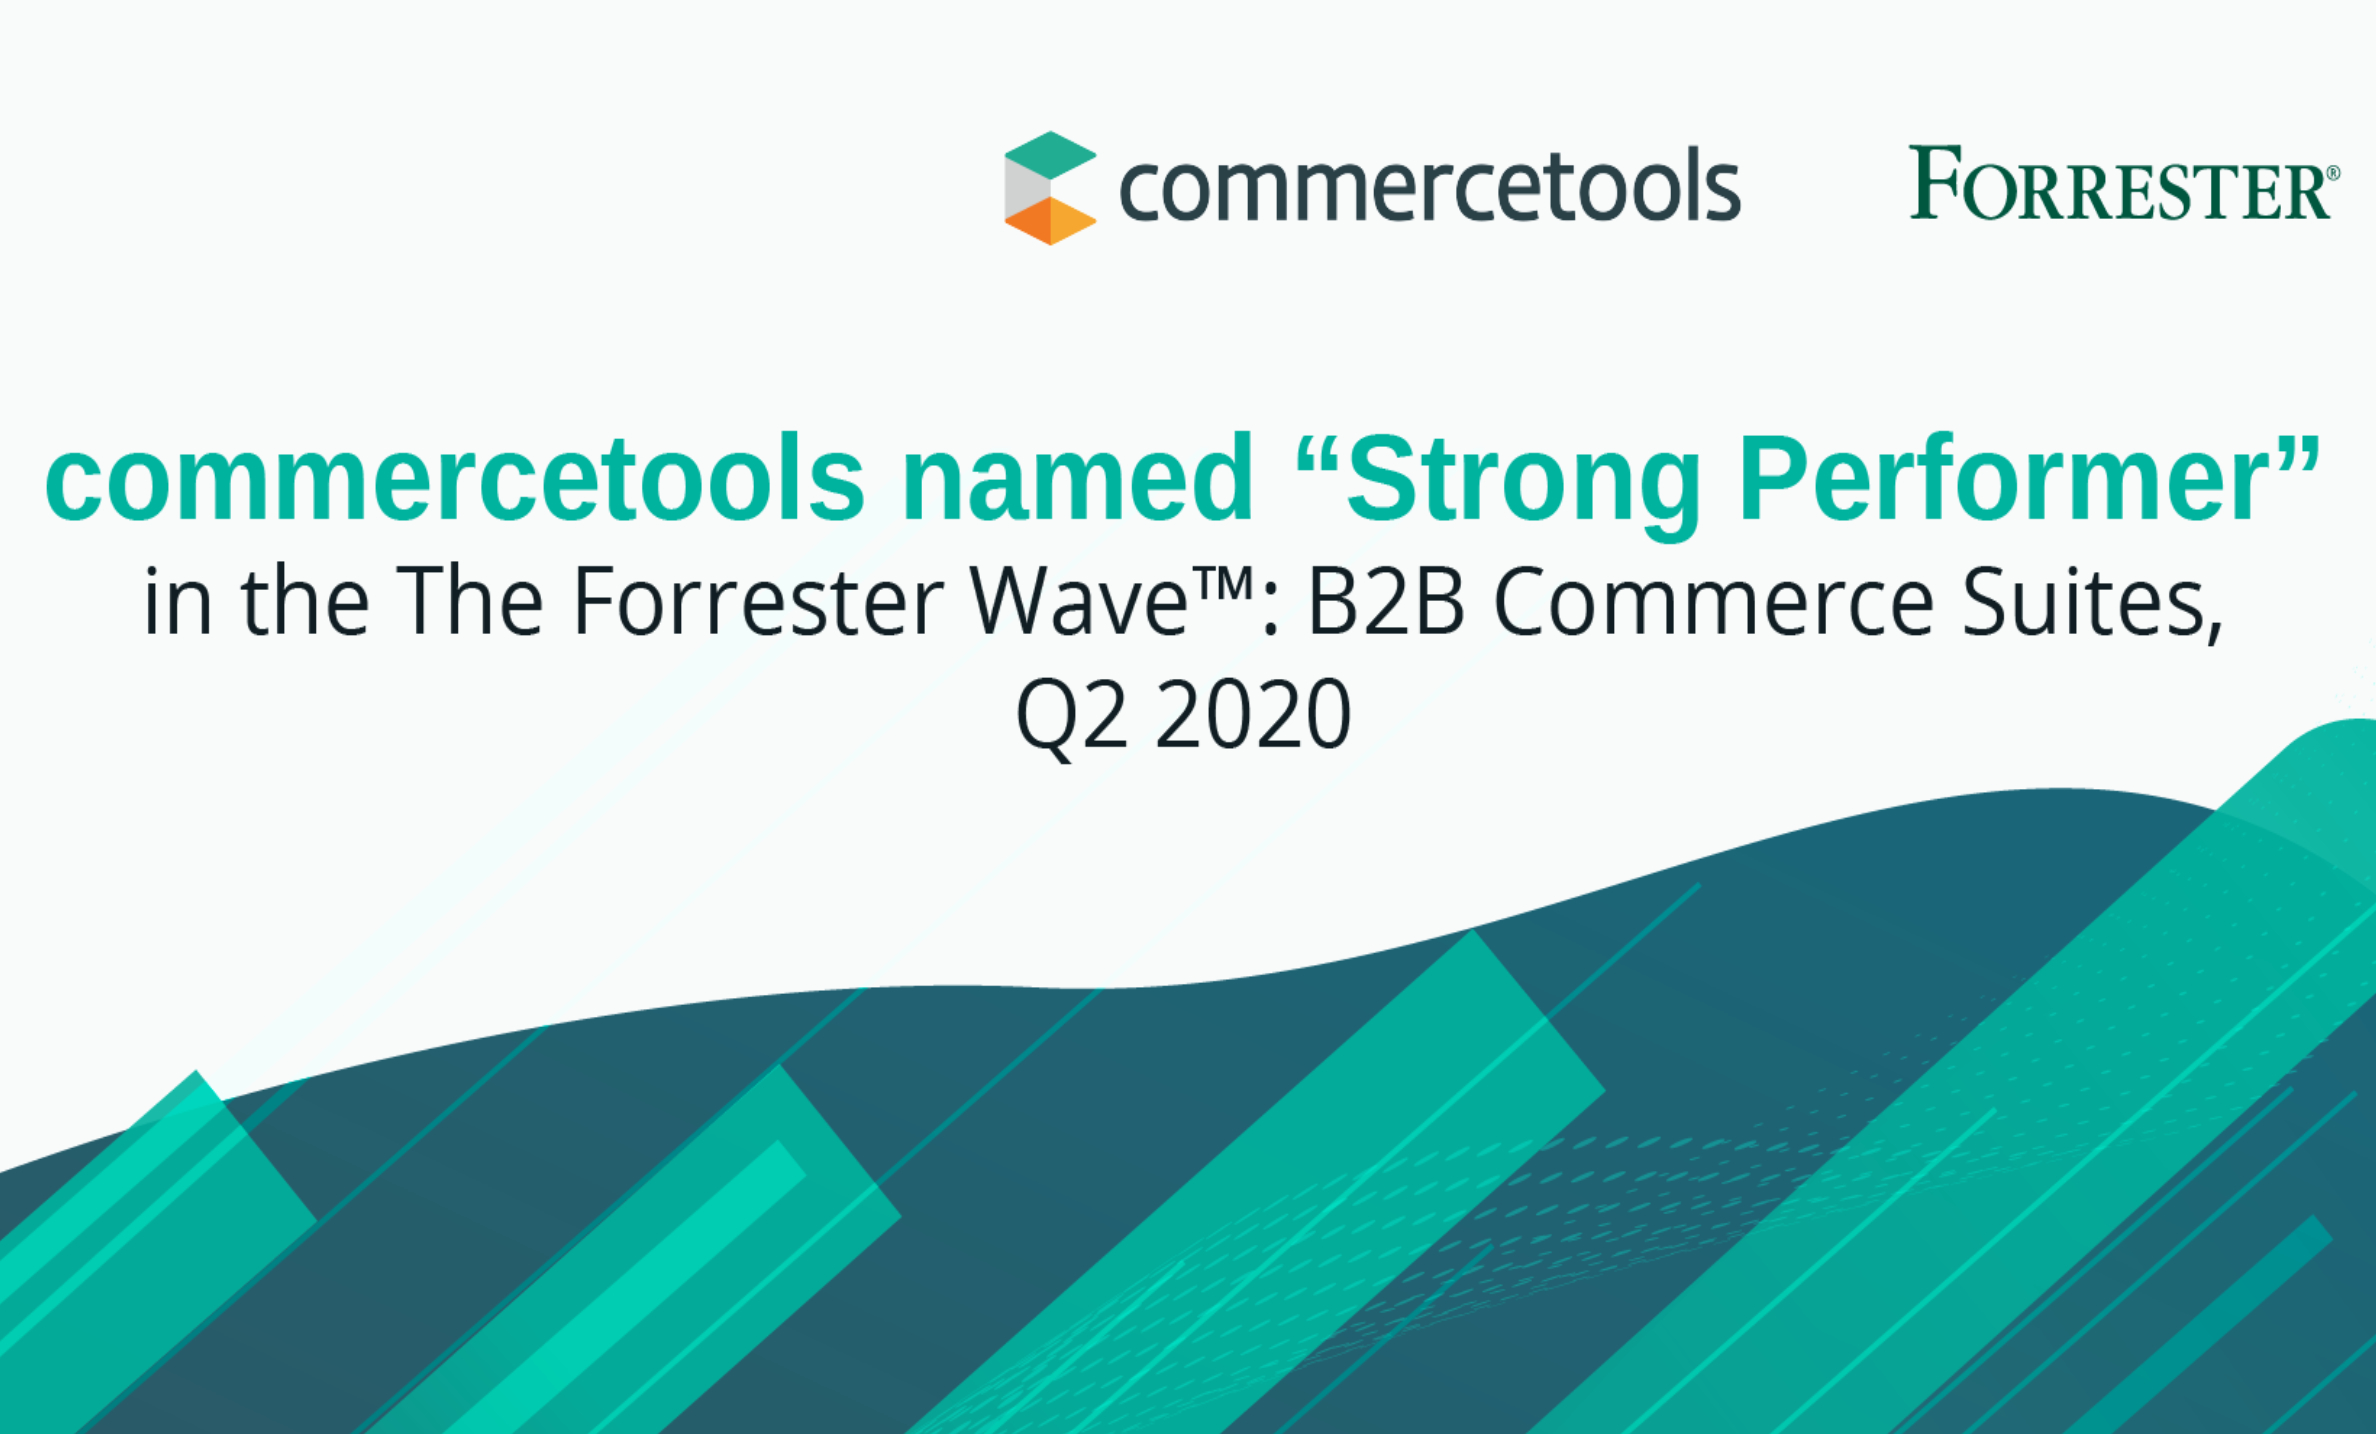 commercetools recognized for B2B Commerce by Forrester